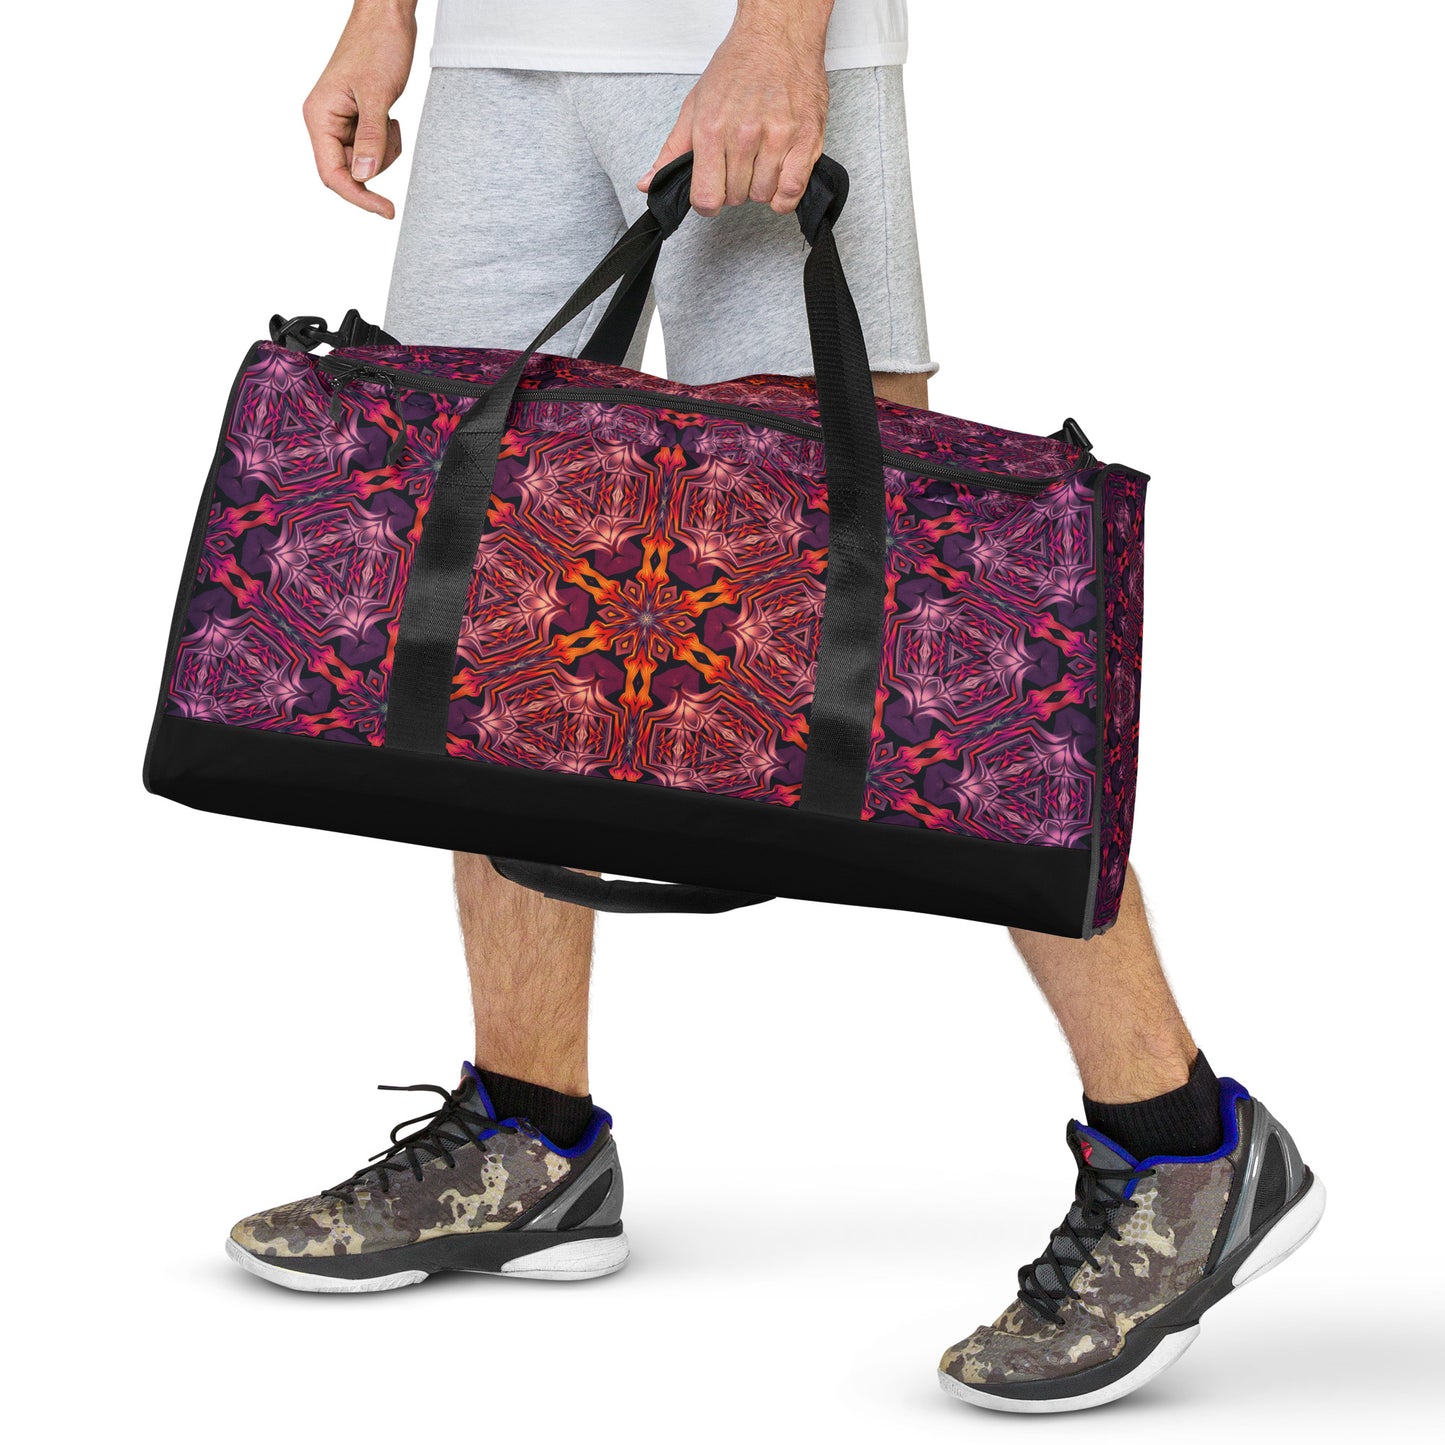 "Forged In Neon" DUFFLE BAG